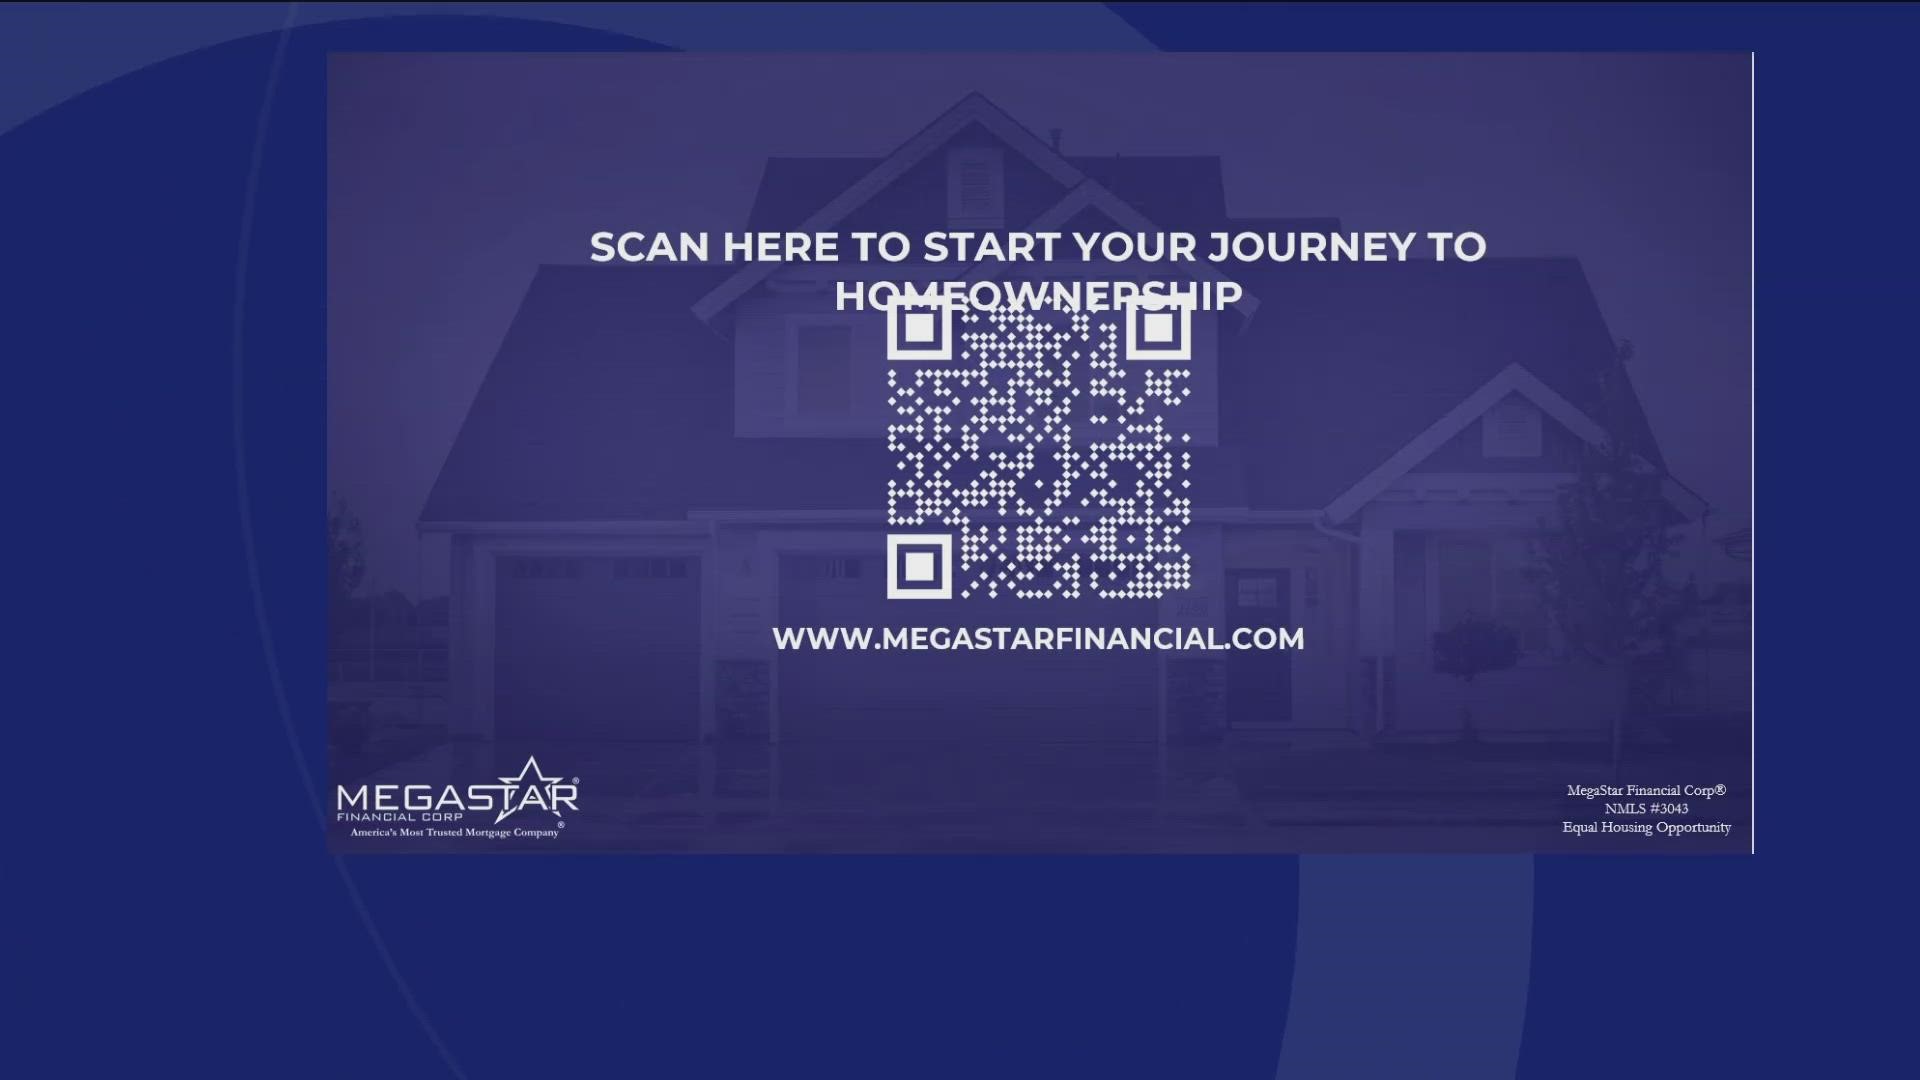 Scan the QR Code to start your journey toward home ownership! You can also call 303.321.8800 to learn more. **PAID CONTENT**